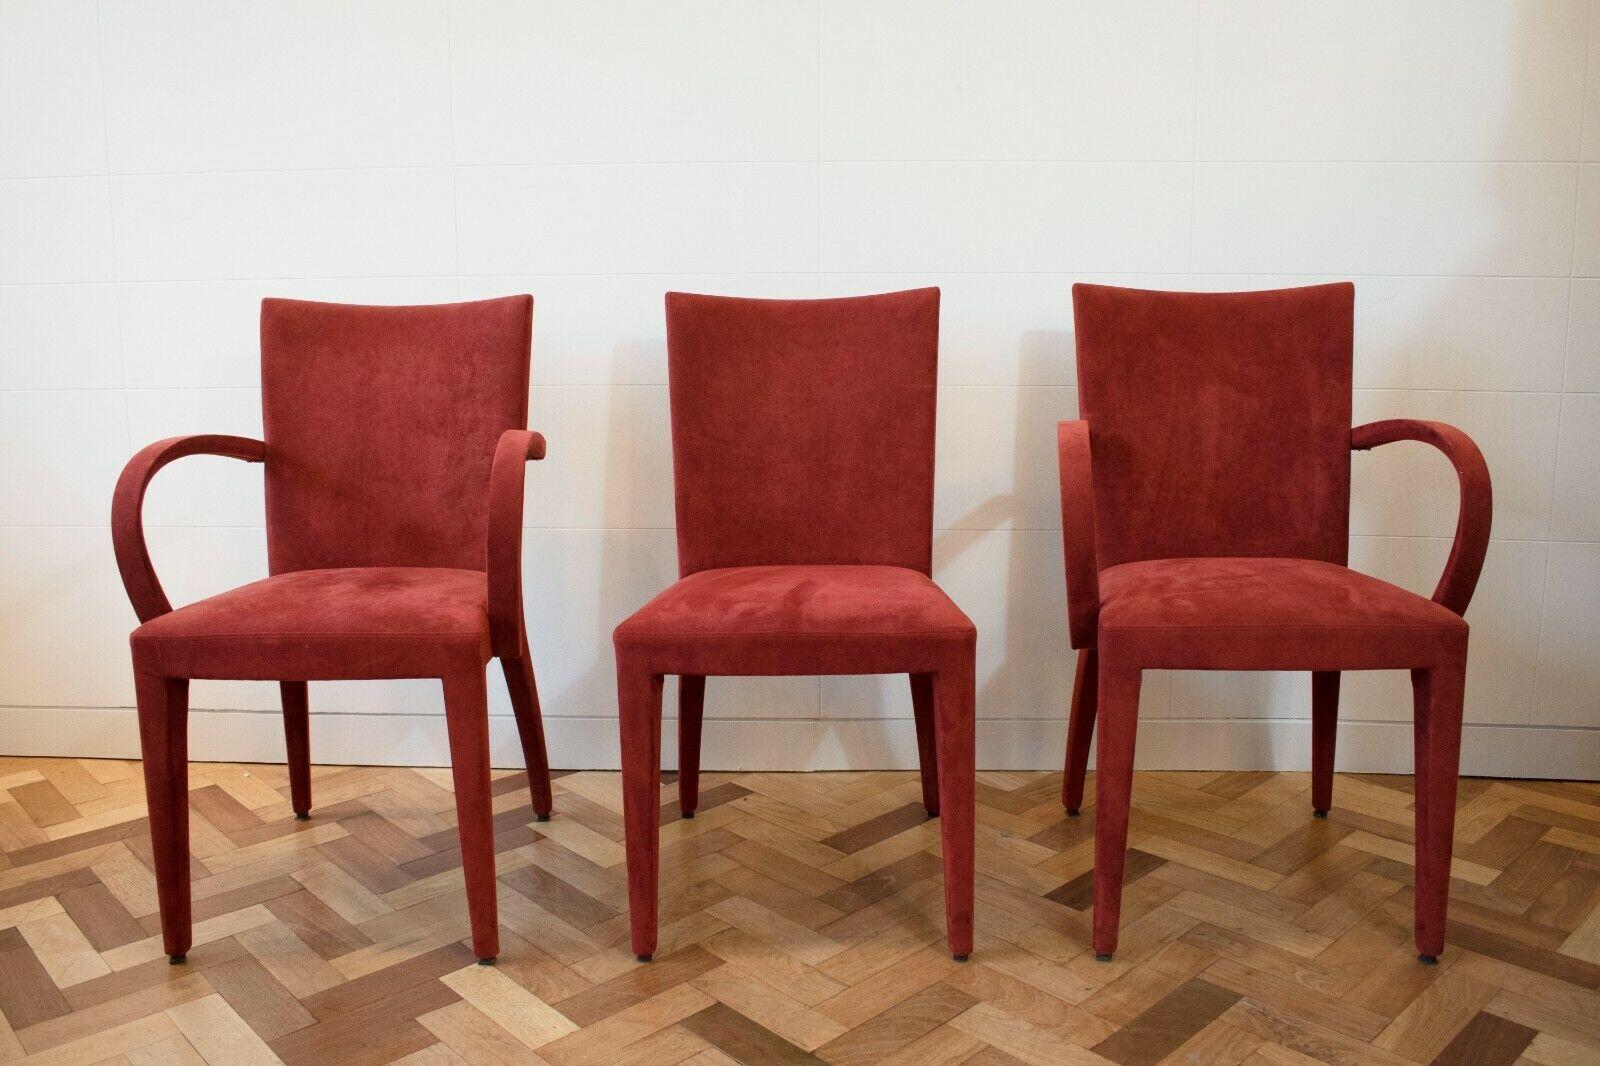 European Roche Bobois Red Suede Dining Chairs, Set of 6 